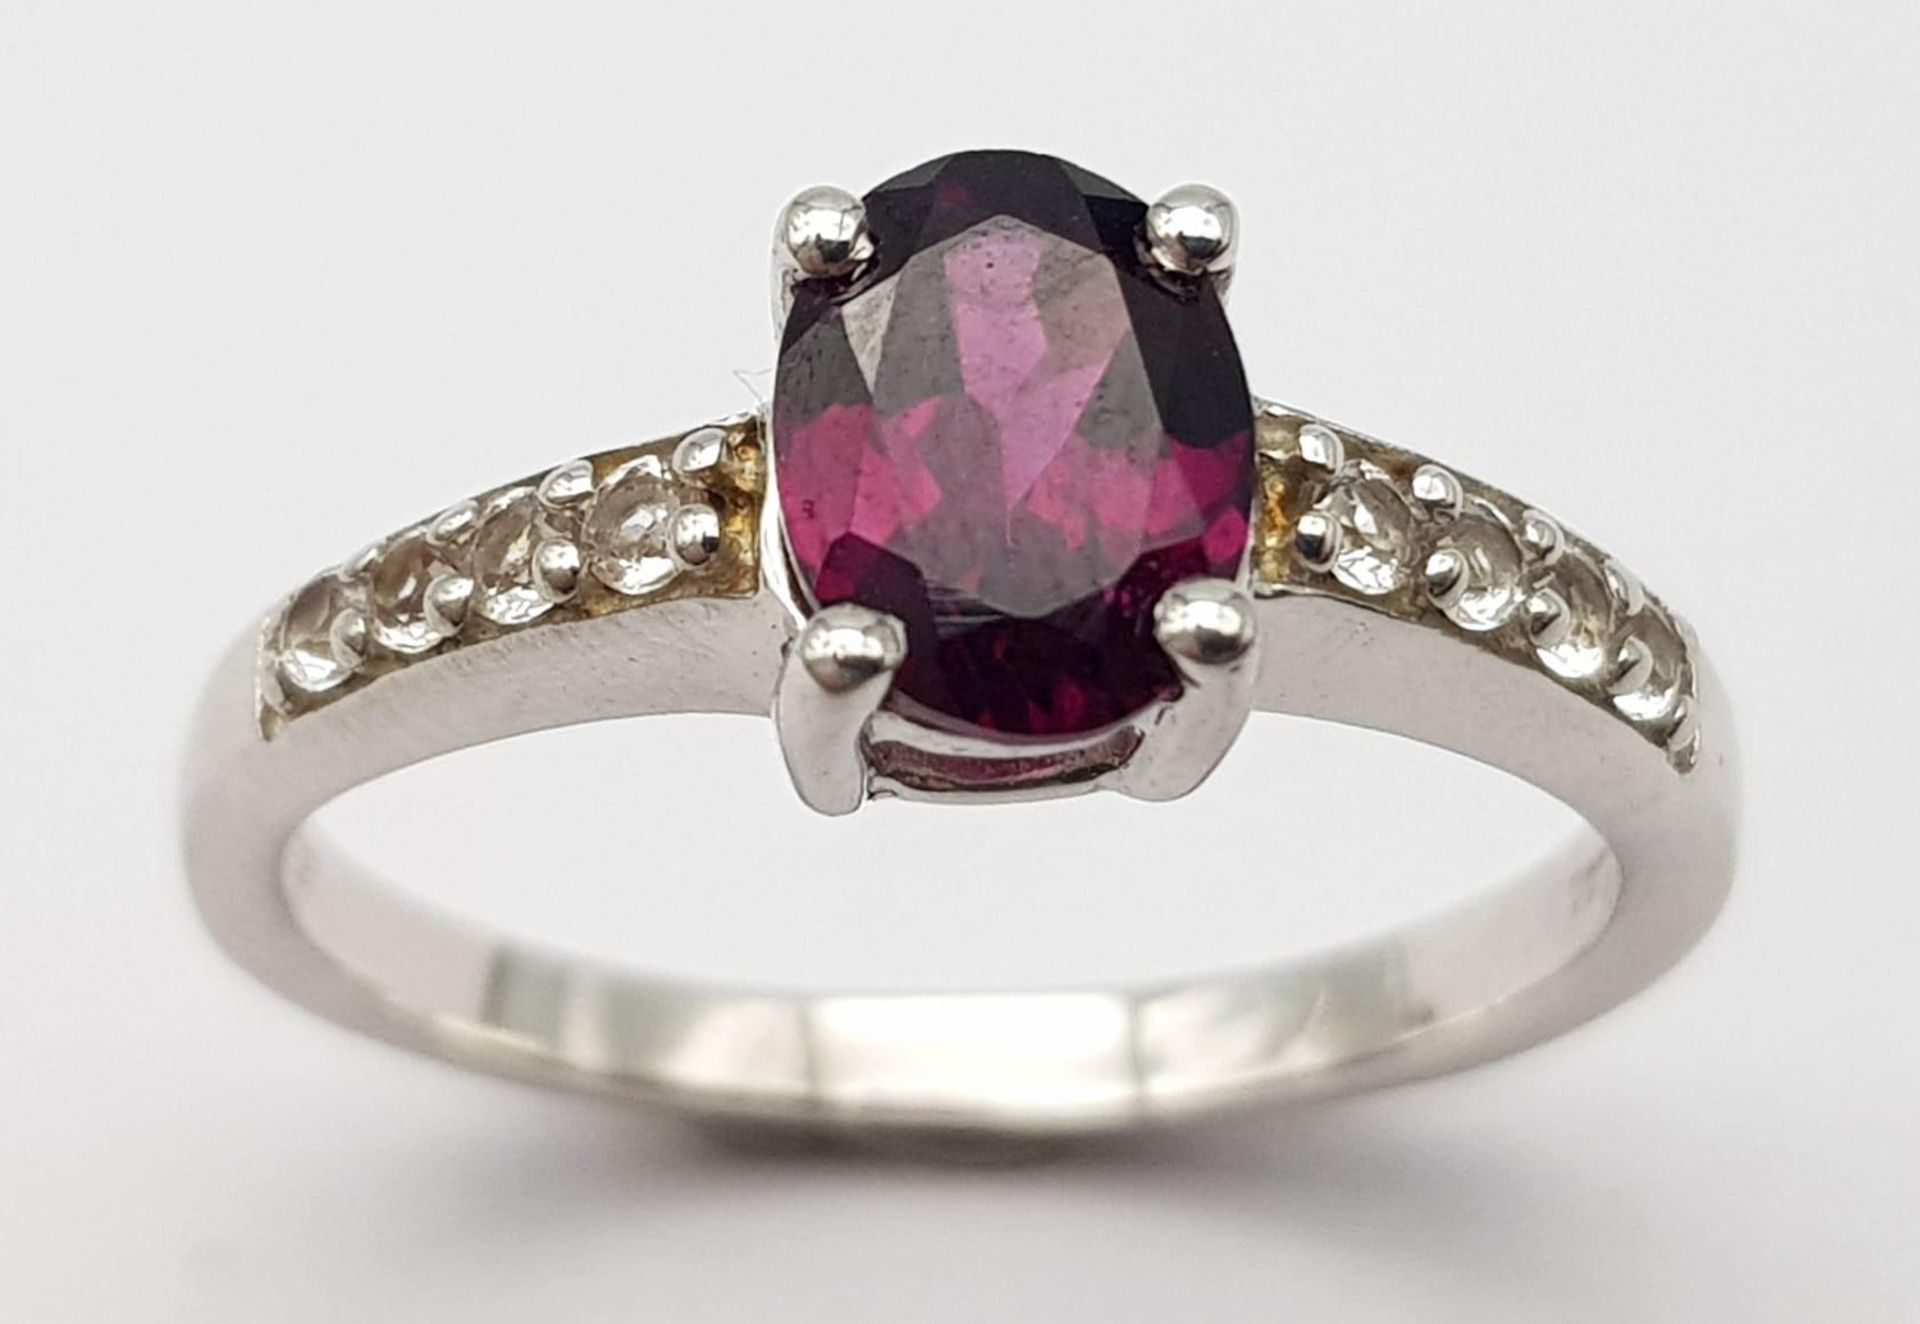 Three 925 Sterling Silver Gemstone Rings: Garnet - Size R, Amethyst - Size P and Emerald - Size P. - Image 9 of 13